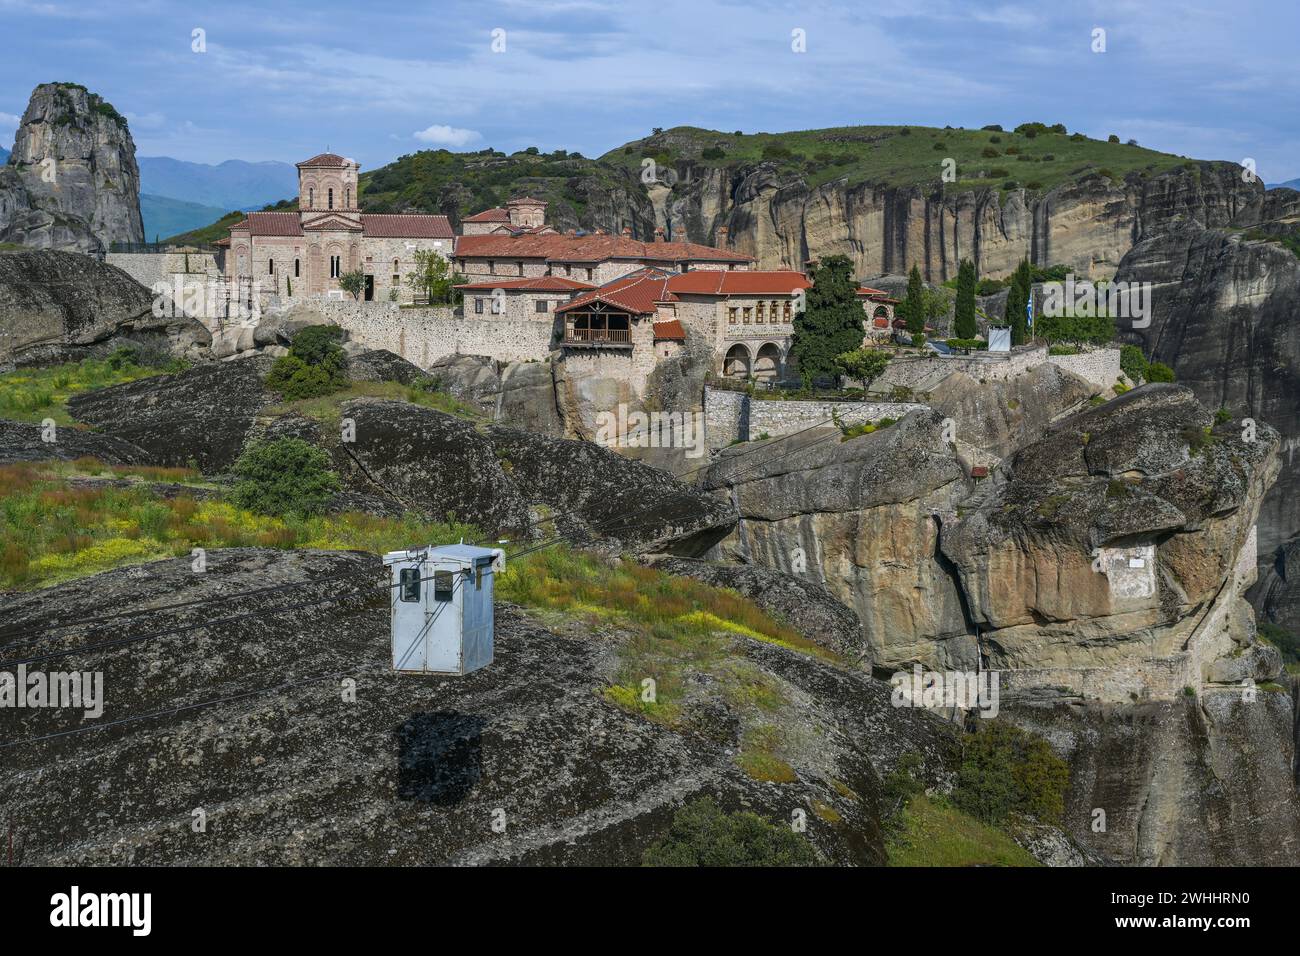 Gondola on a cable winch as access to the Monastery Agia Triada (Holy Trinity) in Meteora which was built high on the top of a r Stock Photo